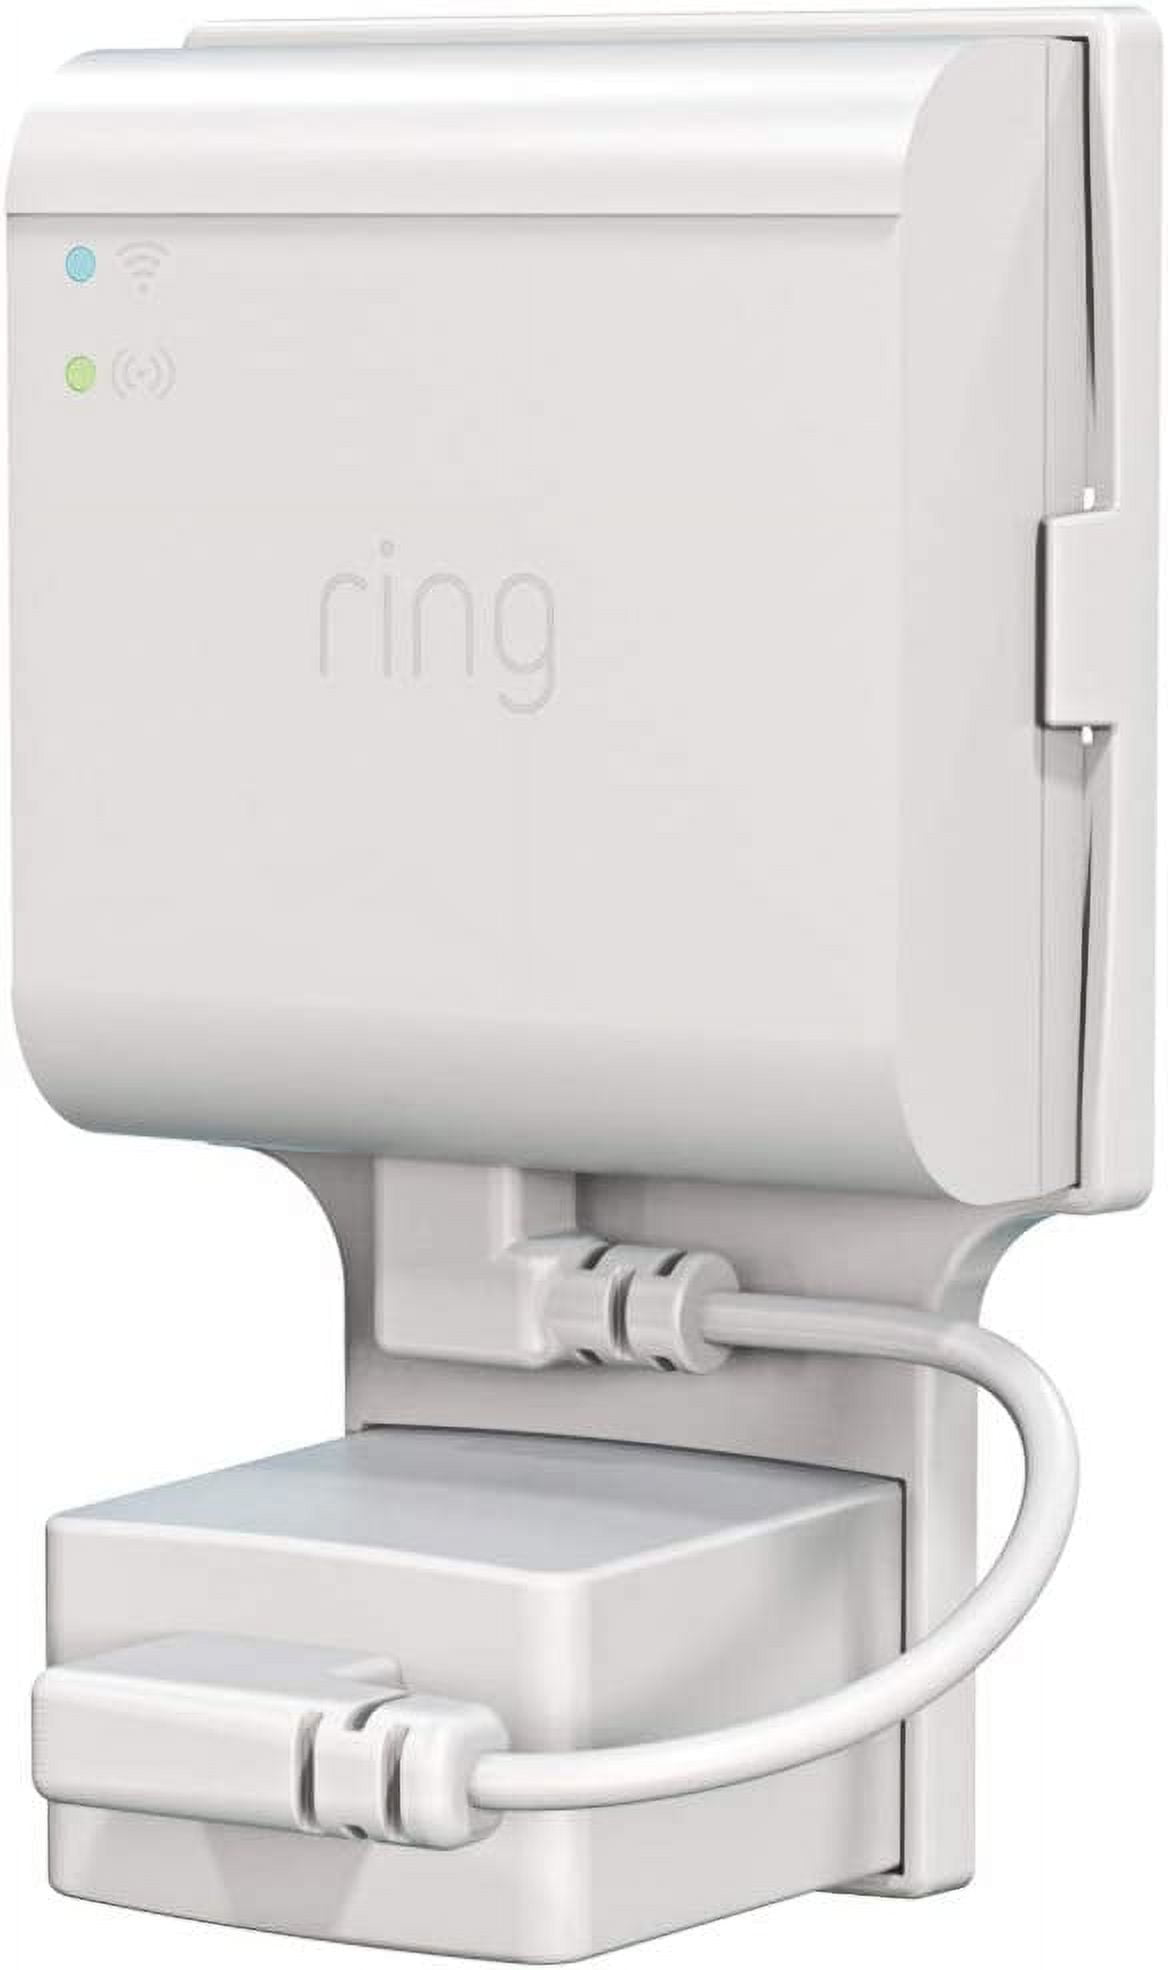 Outlet Mount for Ring Bridge, No Drilling and Speace Saving Wall Mount  Holder with Short Cable for Ring Smart Lighting